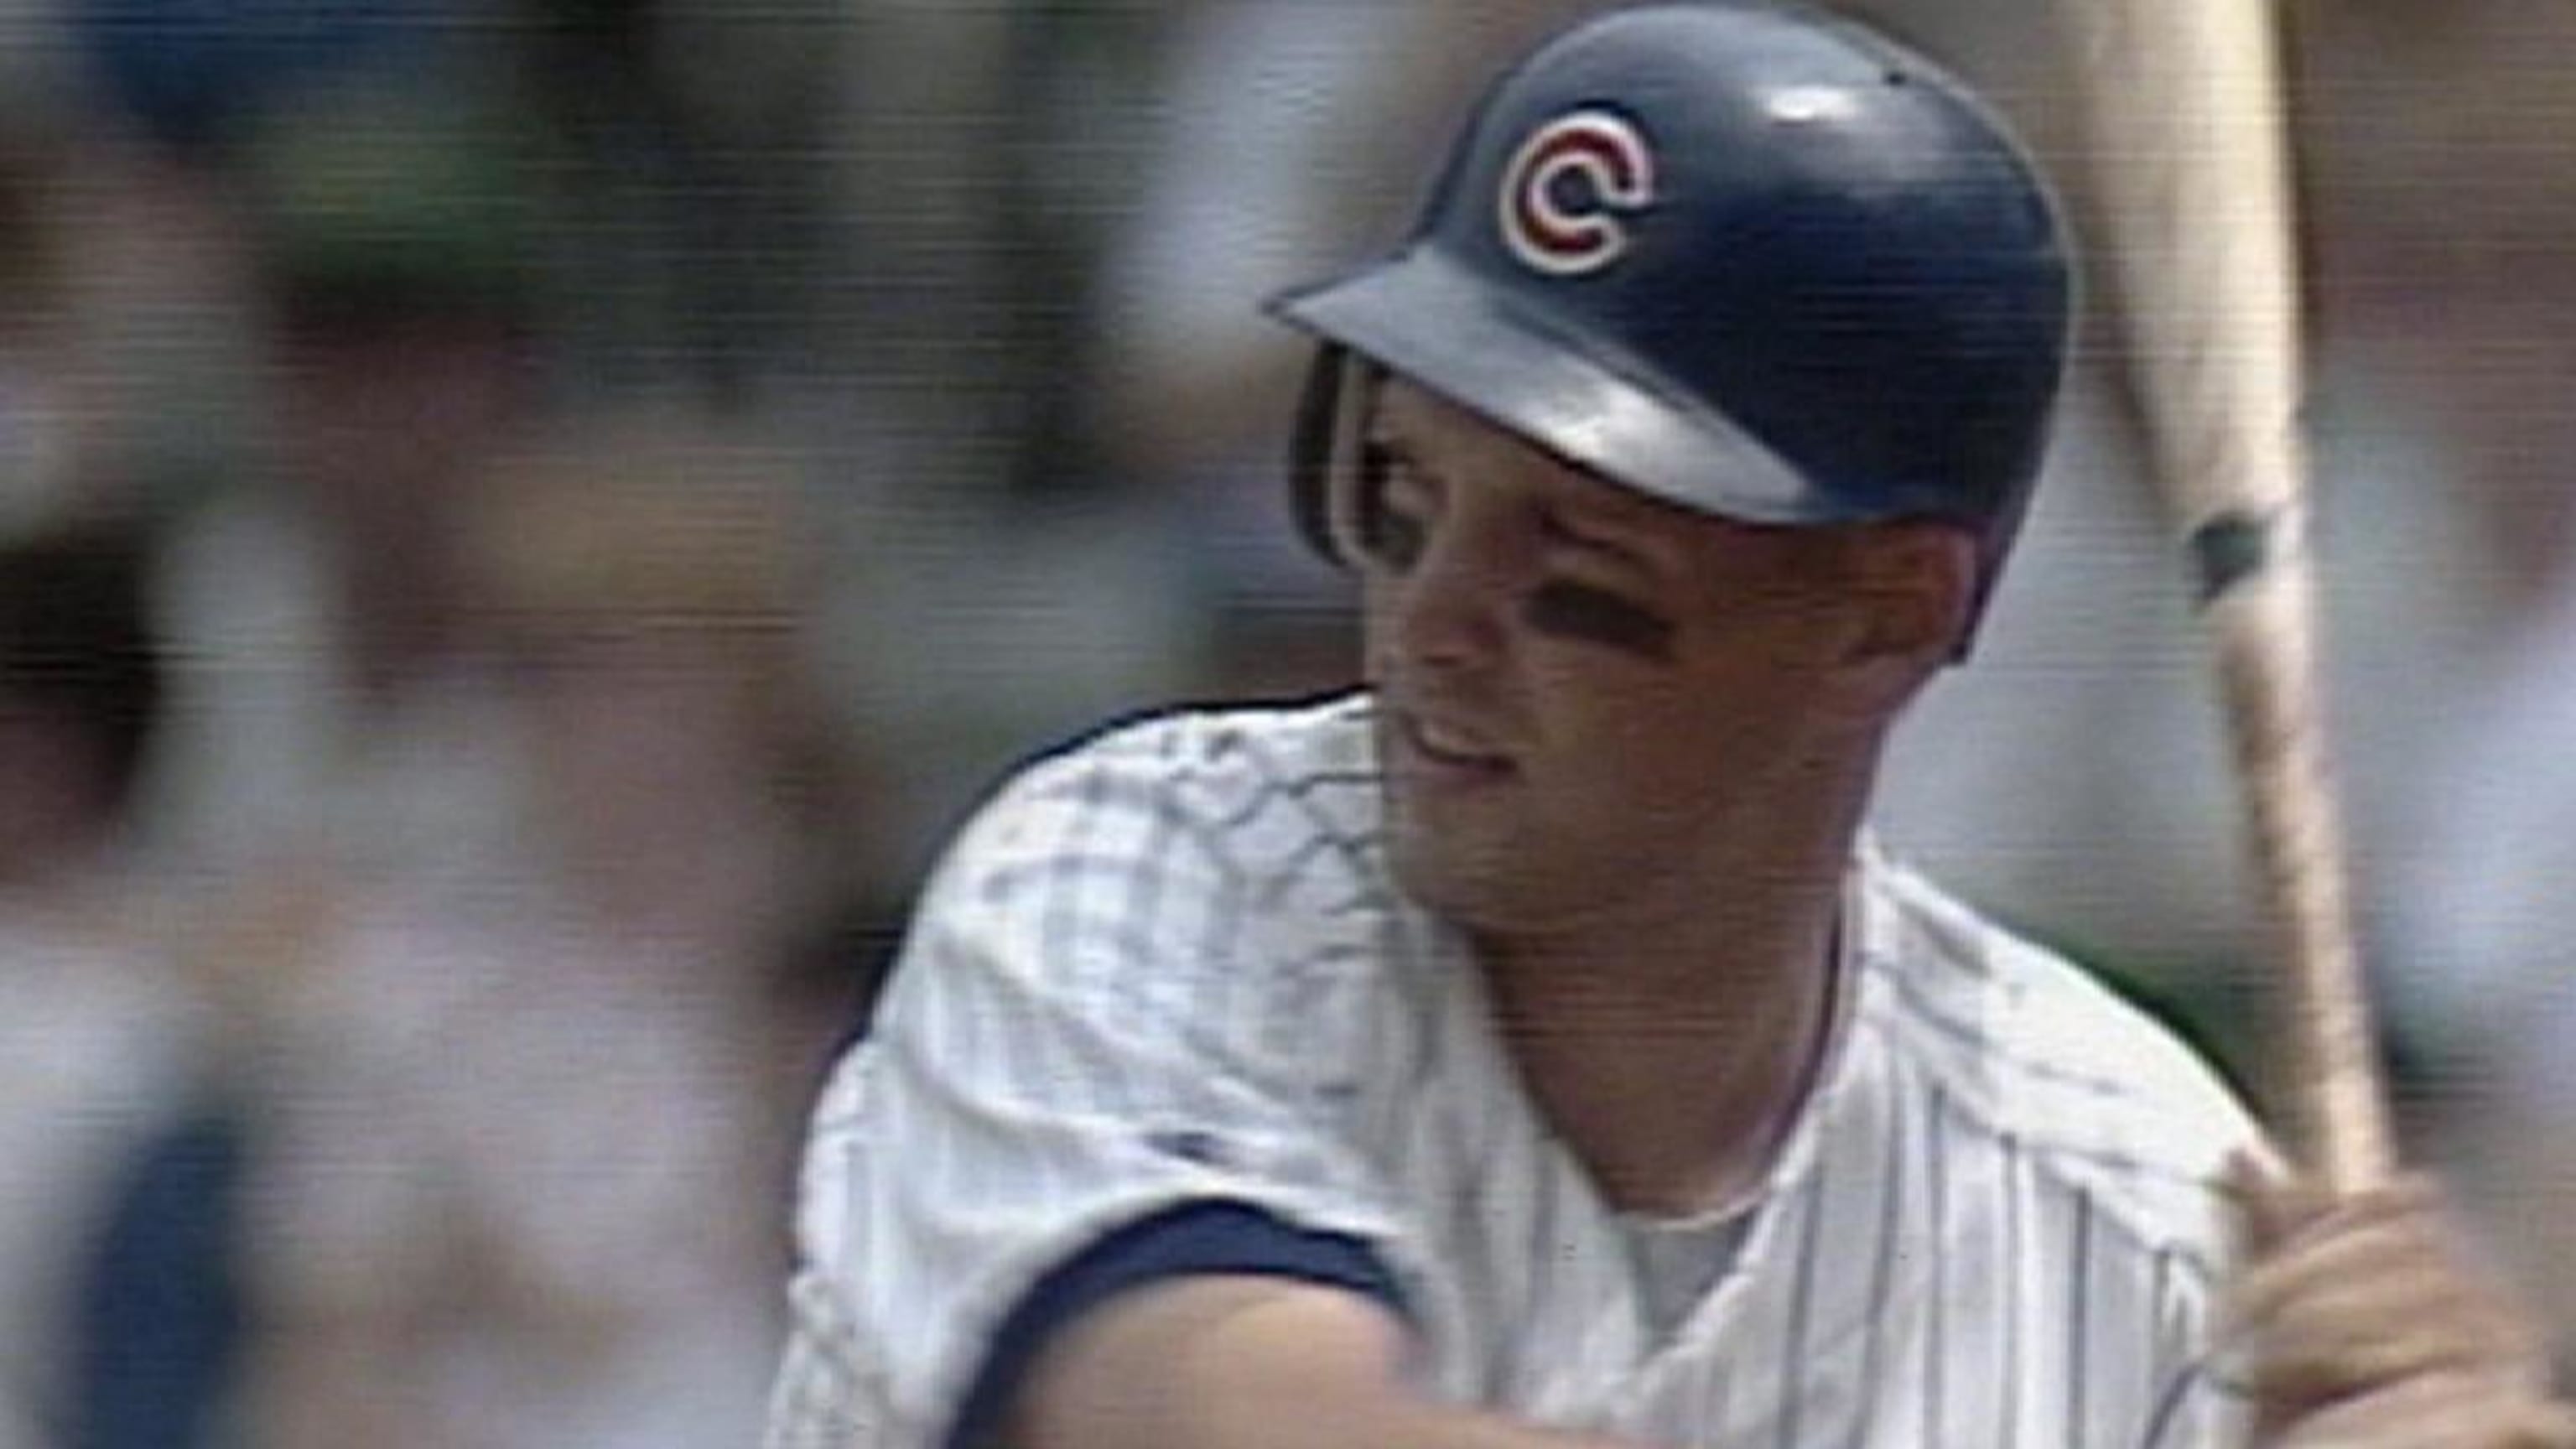 Mark Grace, Shawon Dunston inducted into Cubs Hall of Fame